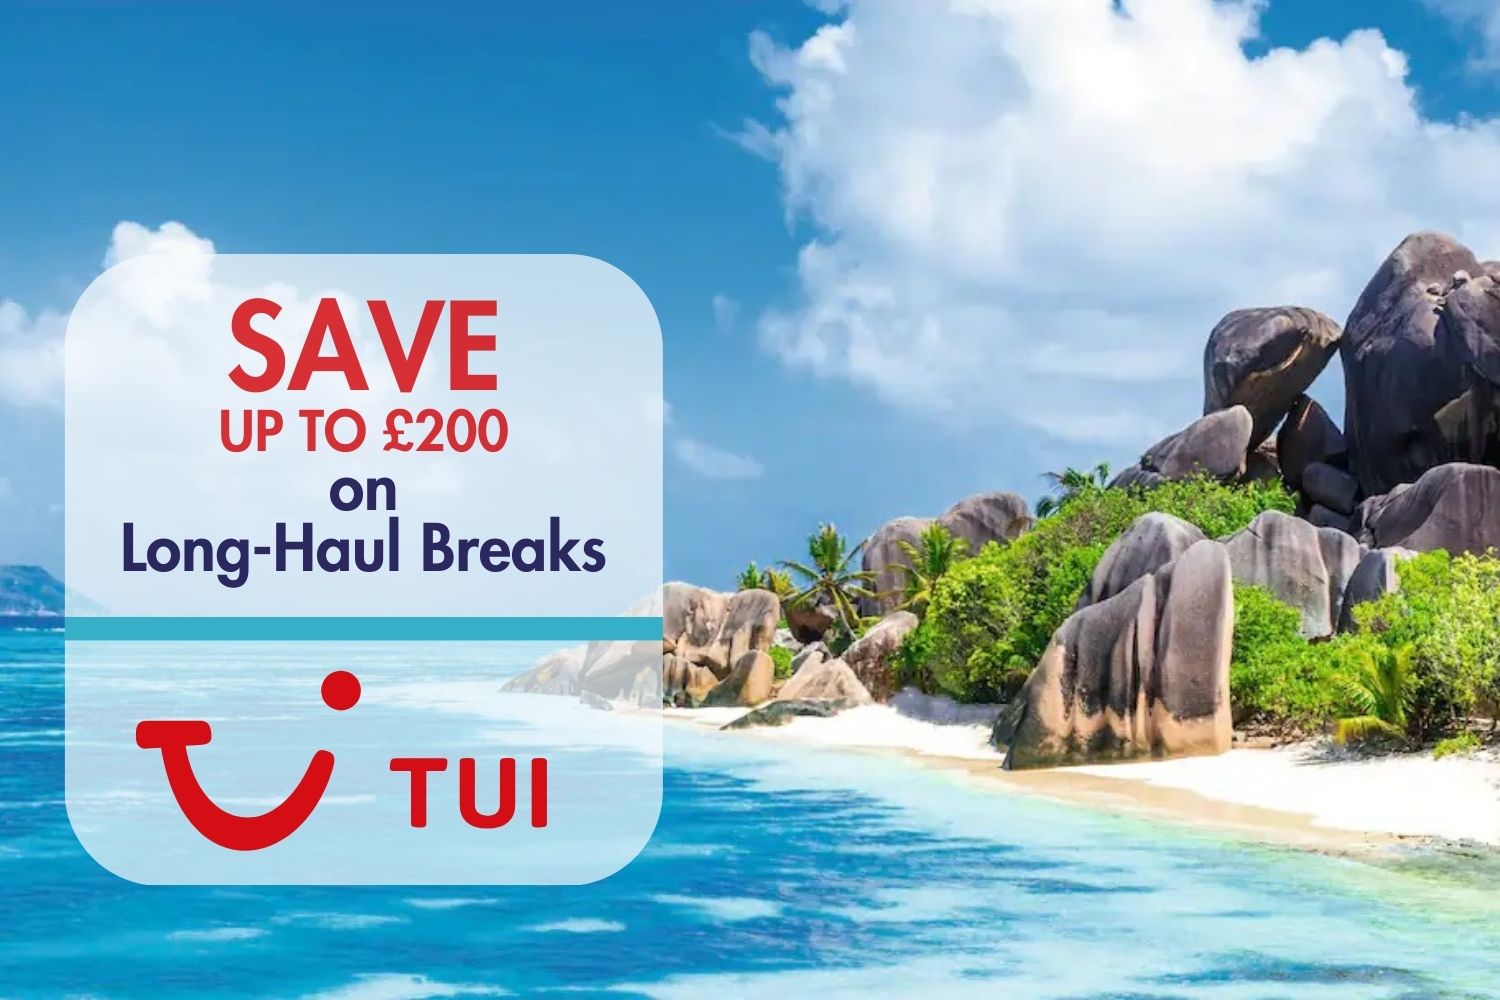 SAVE £200 on Longer Holiday Breaks